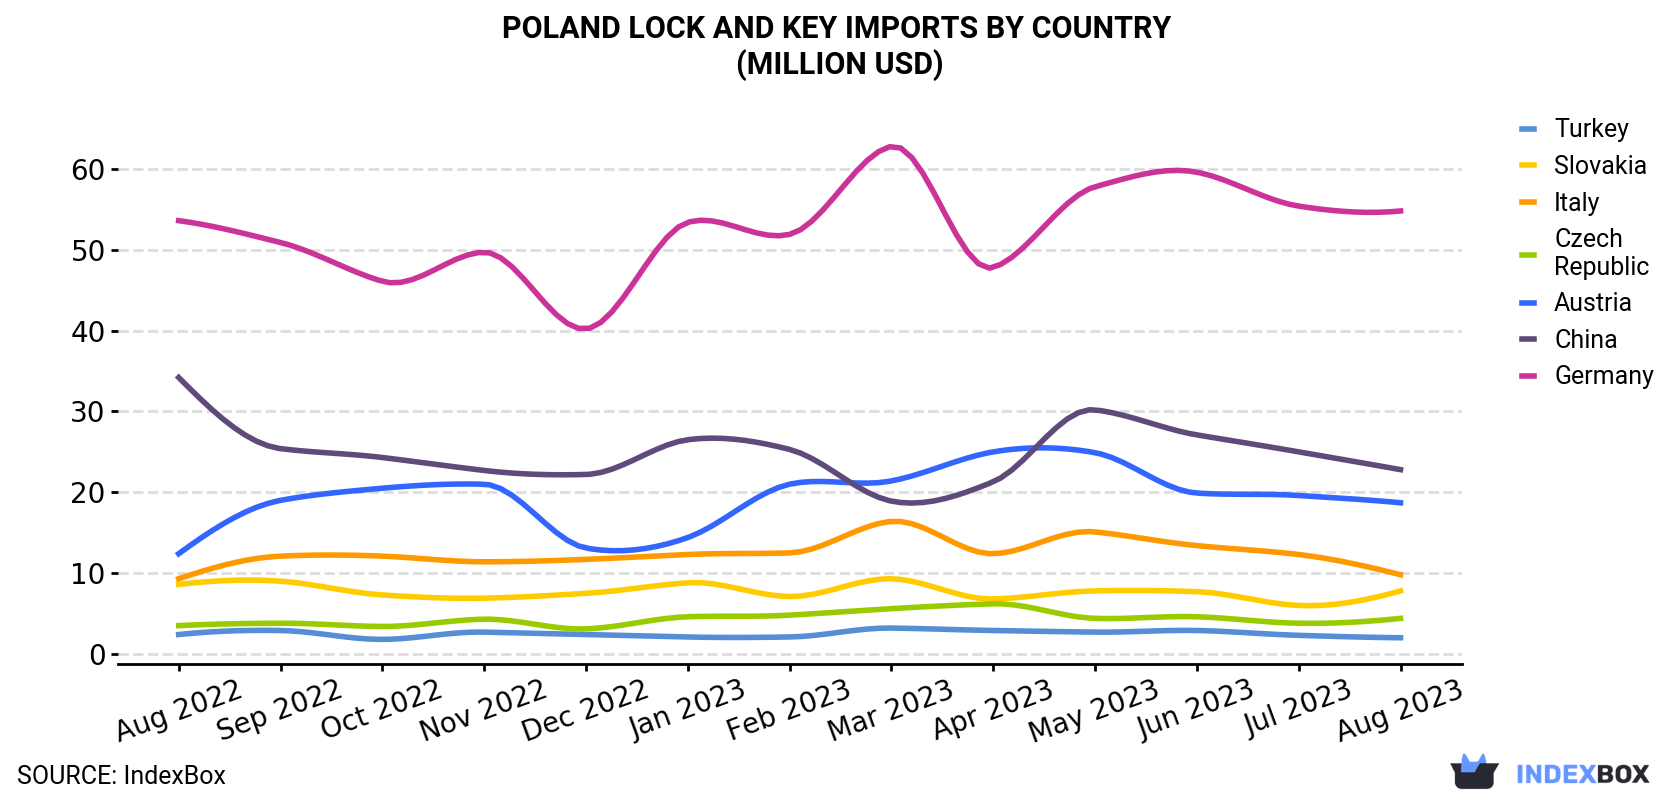 Poland Lock And Key Imports By Country (Million USD)